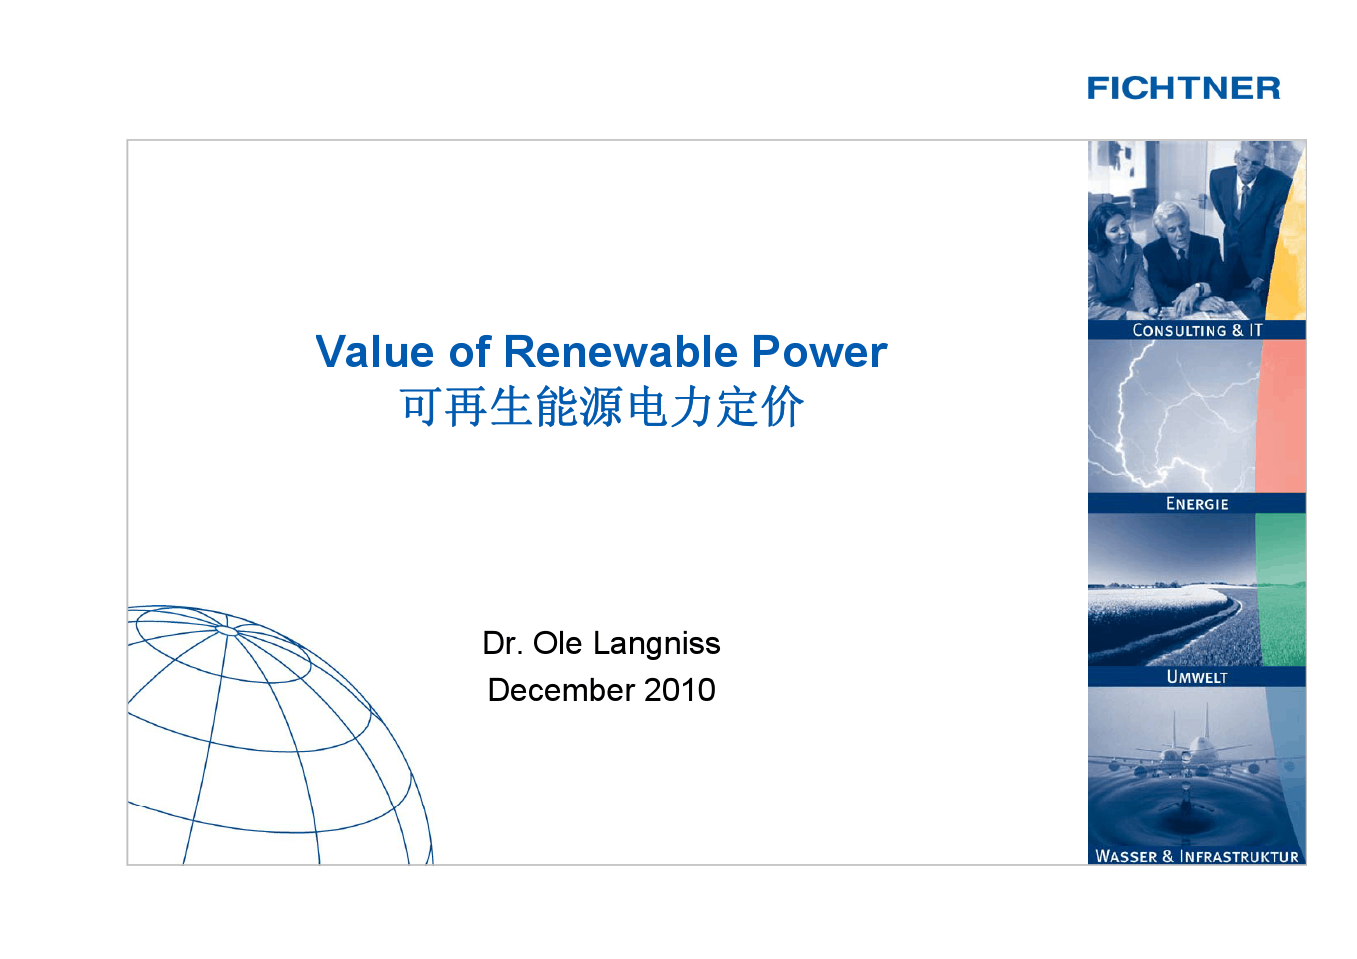 PPT2---Value of Renewable Power